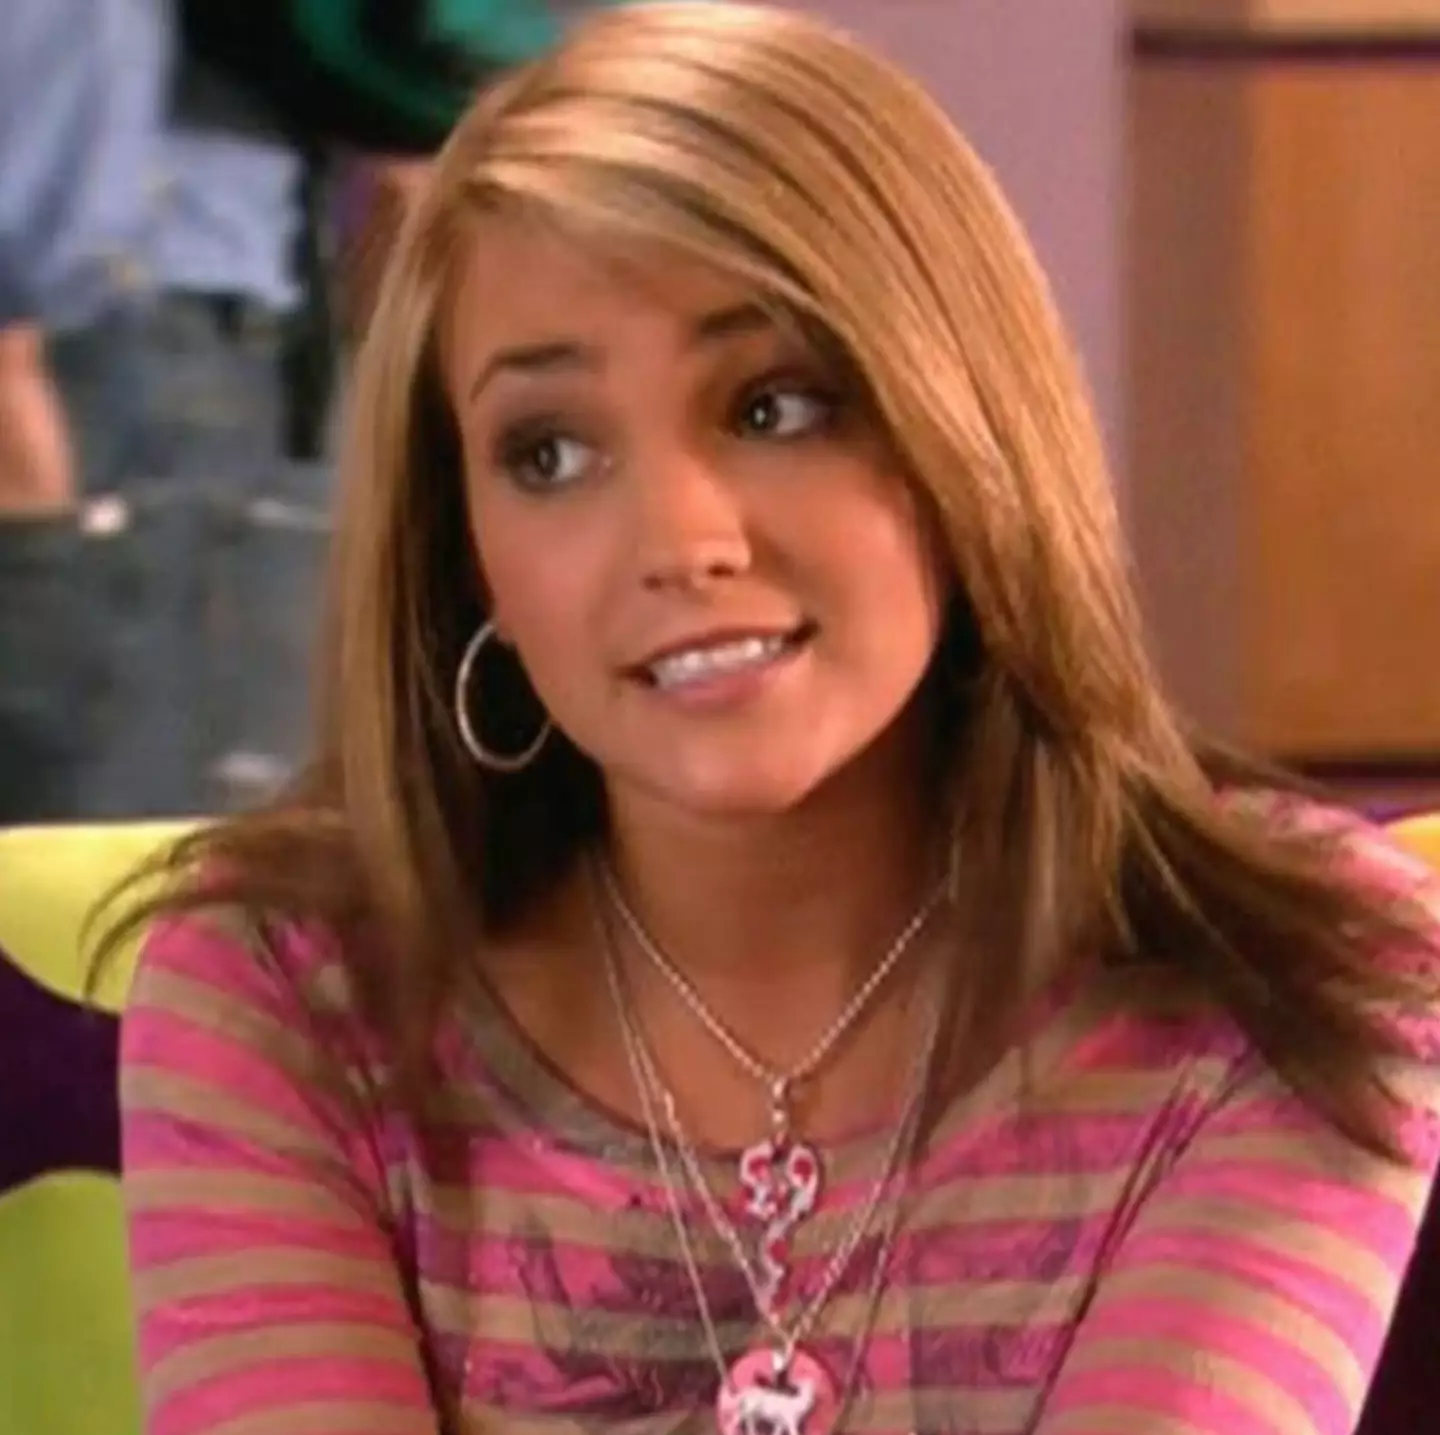 Jamie Lynn Spears became pregnant at 16 while filming the Nickelodeon show.